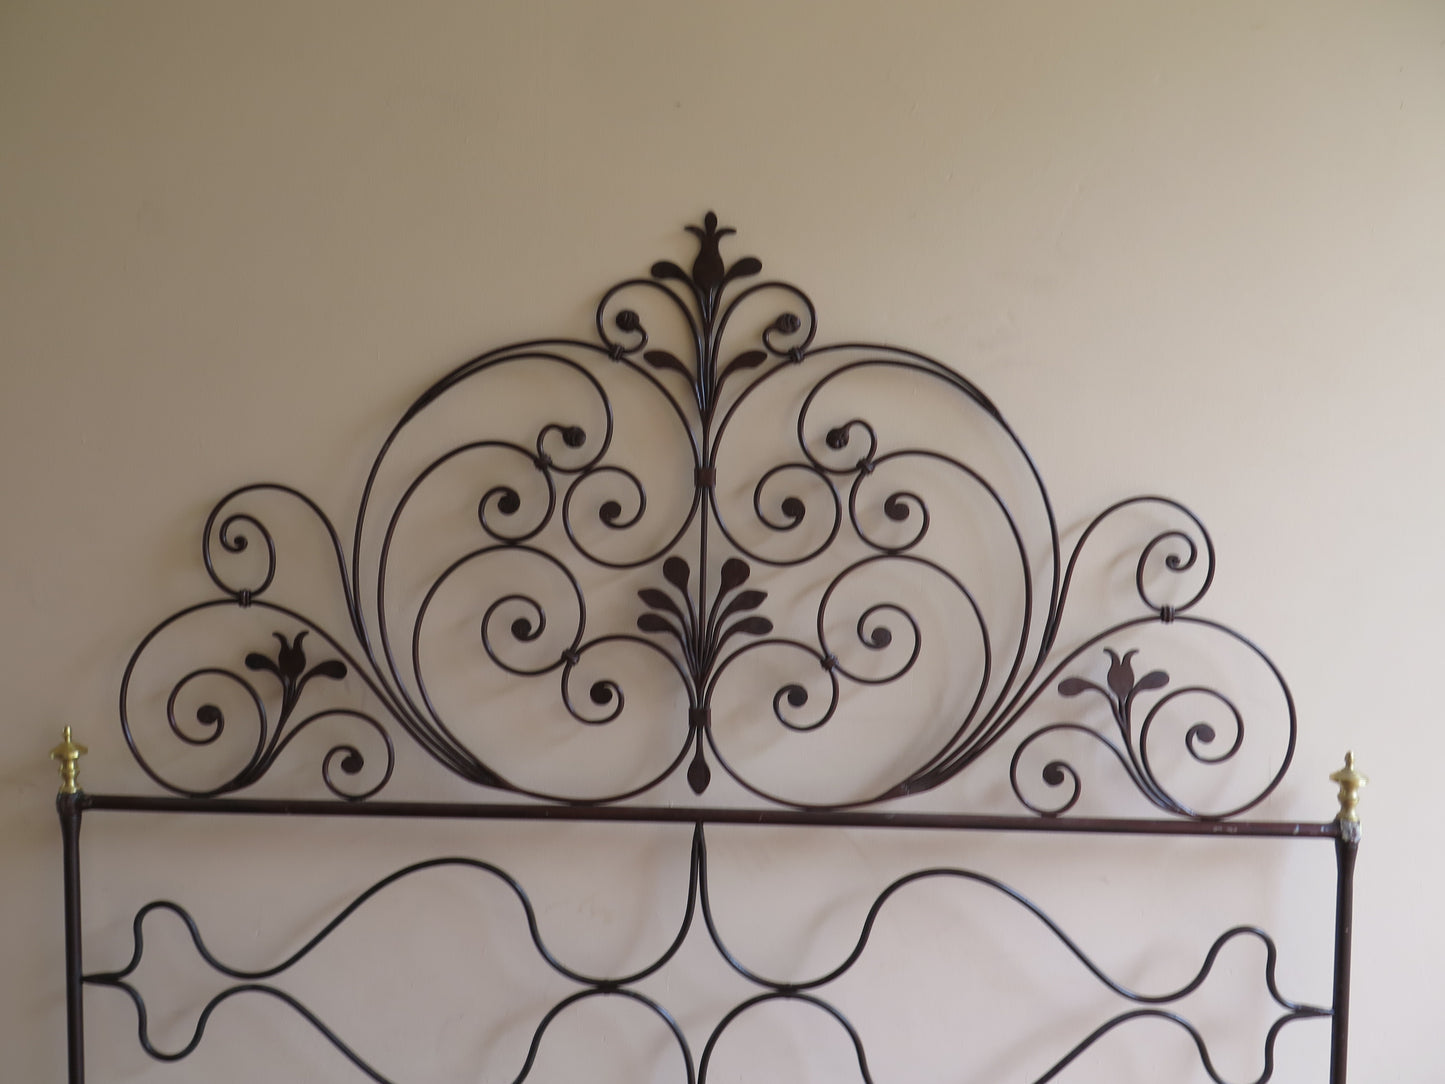 DOUBLE BED HEADBOARD IN WROUGHT IRON VINTAGE PEACOCK TAIL HEADBOARD 10